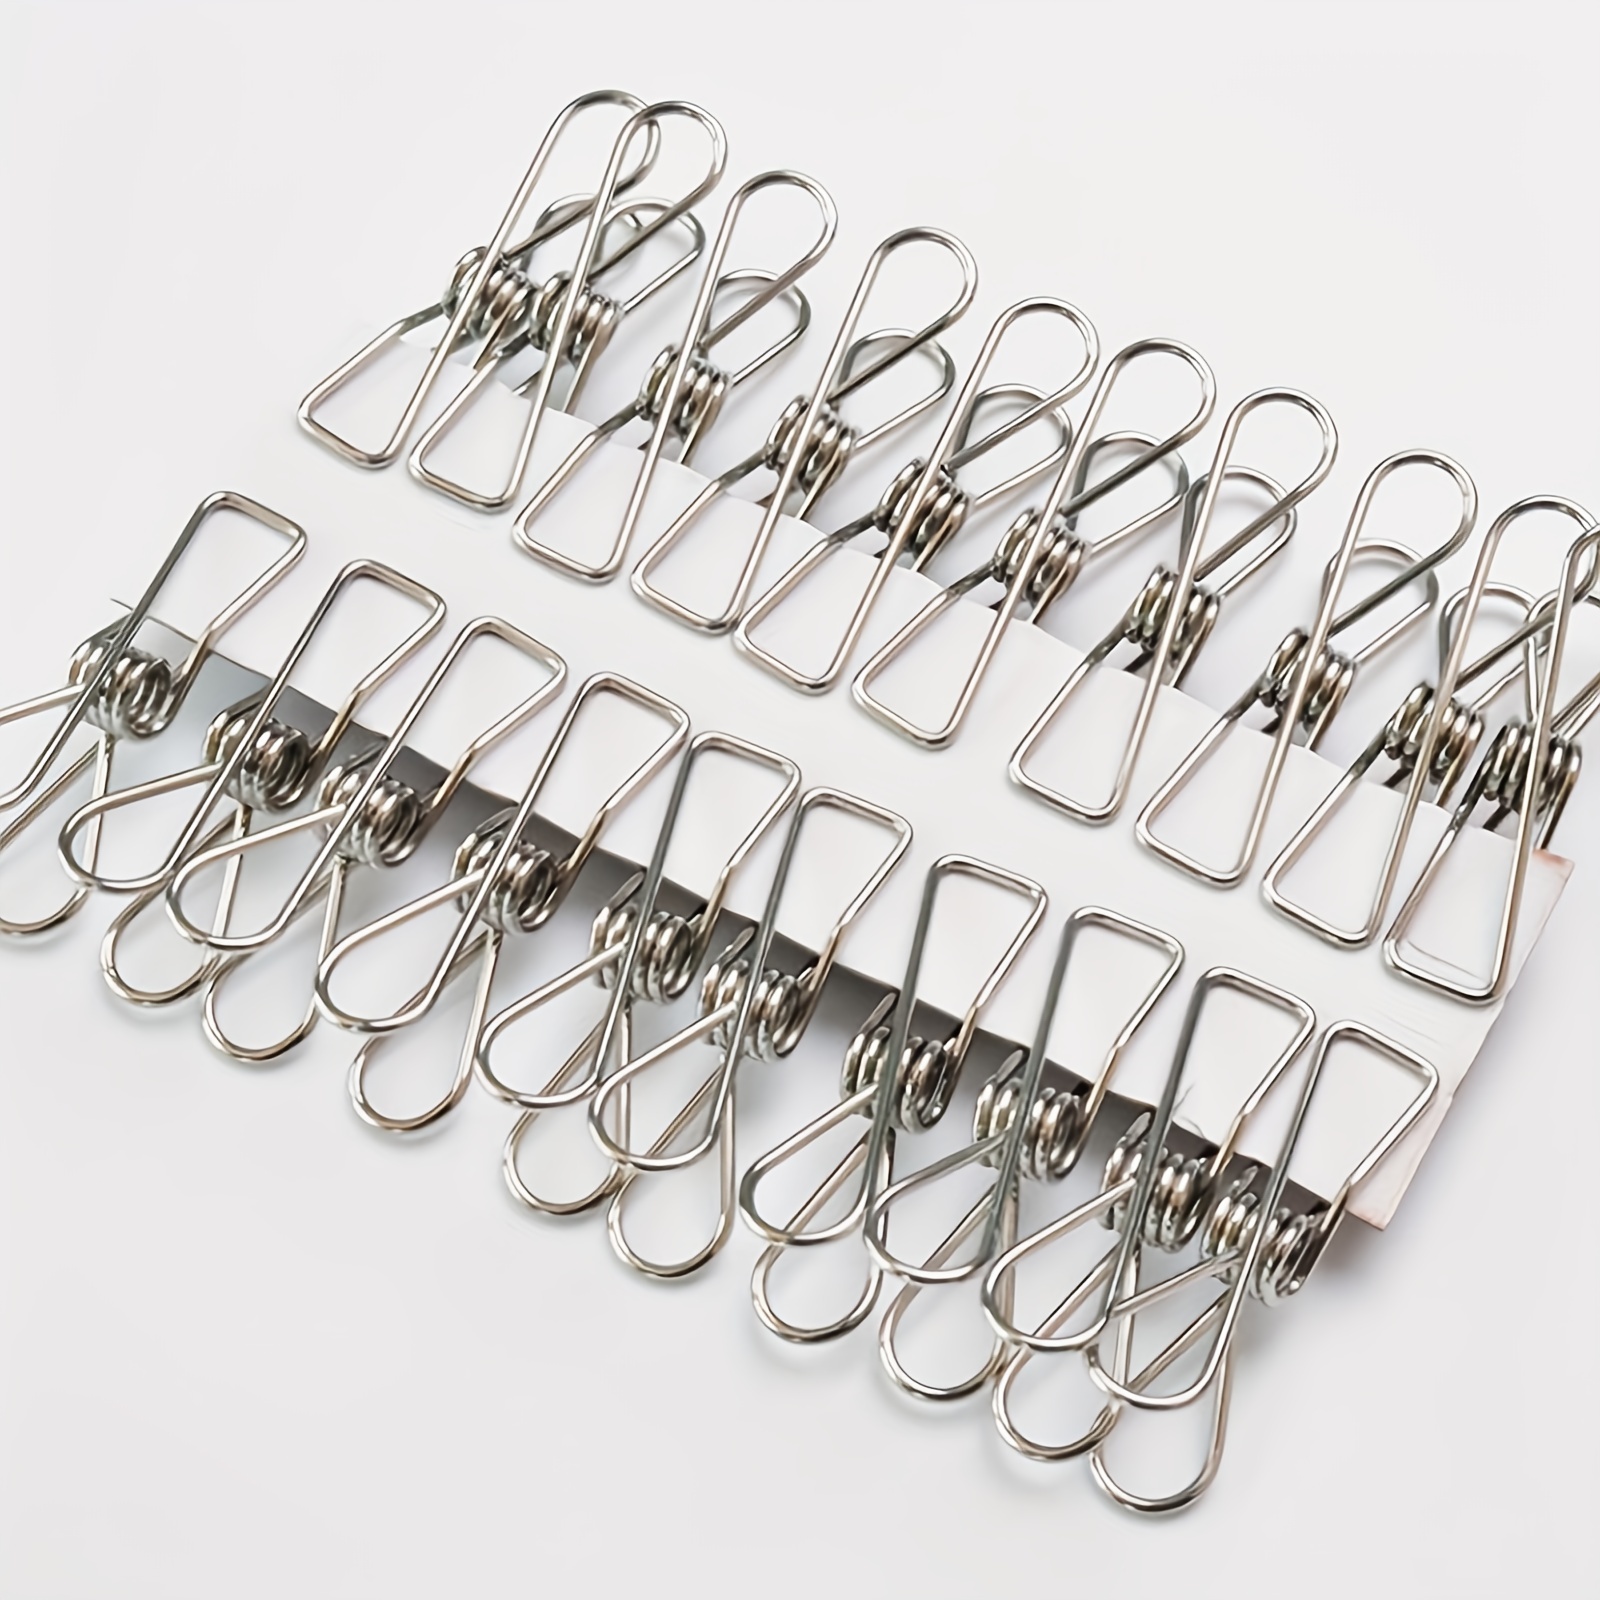 Laundry Clothes Pins - Clothesline Clips - Travel Clothes Line Stainless  Steel Wire Metal Laundry Clip - Set Of 24 Indoor Outdoor Hanger Clamps -  Chip Bag Clips - Office Binder by